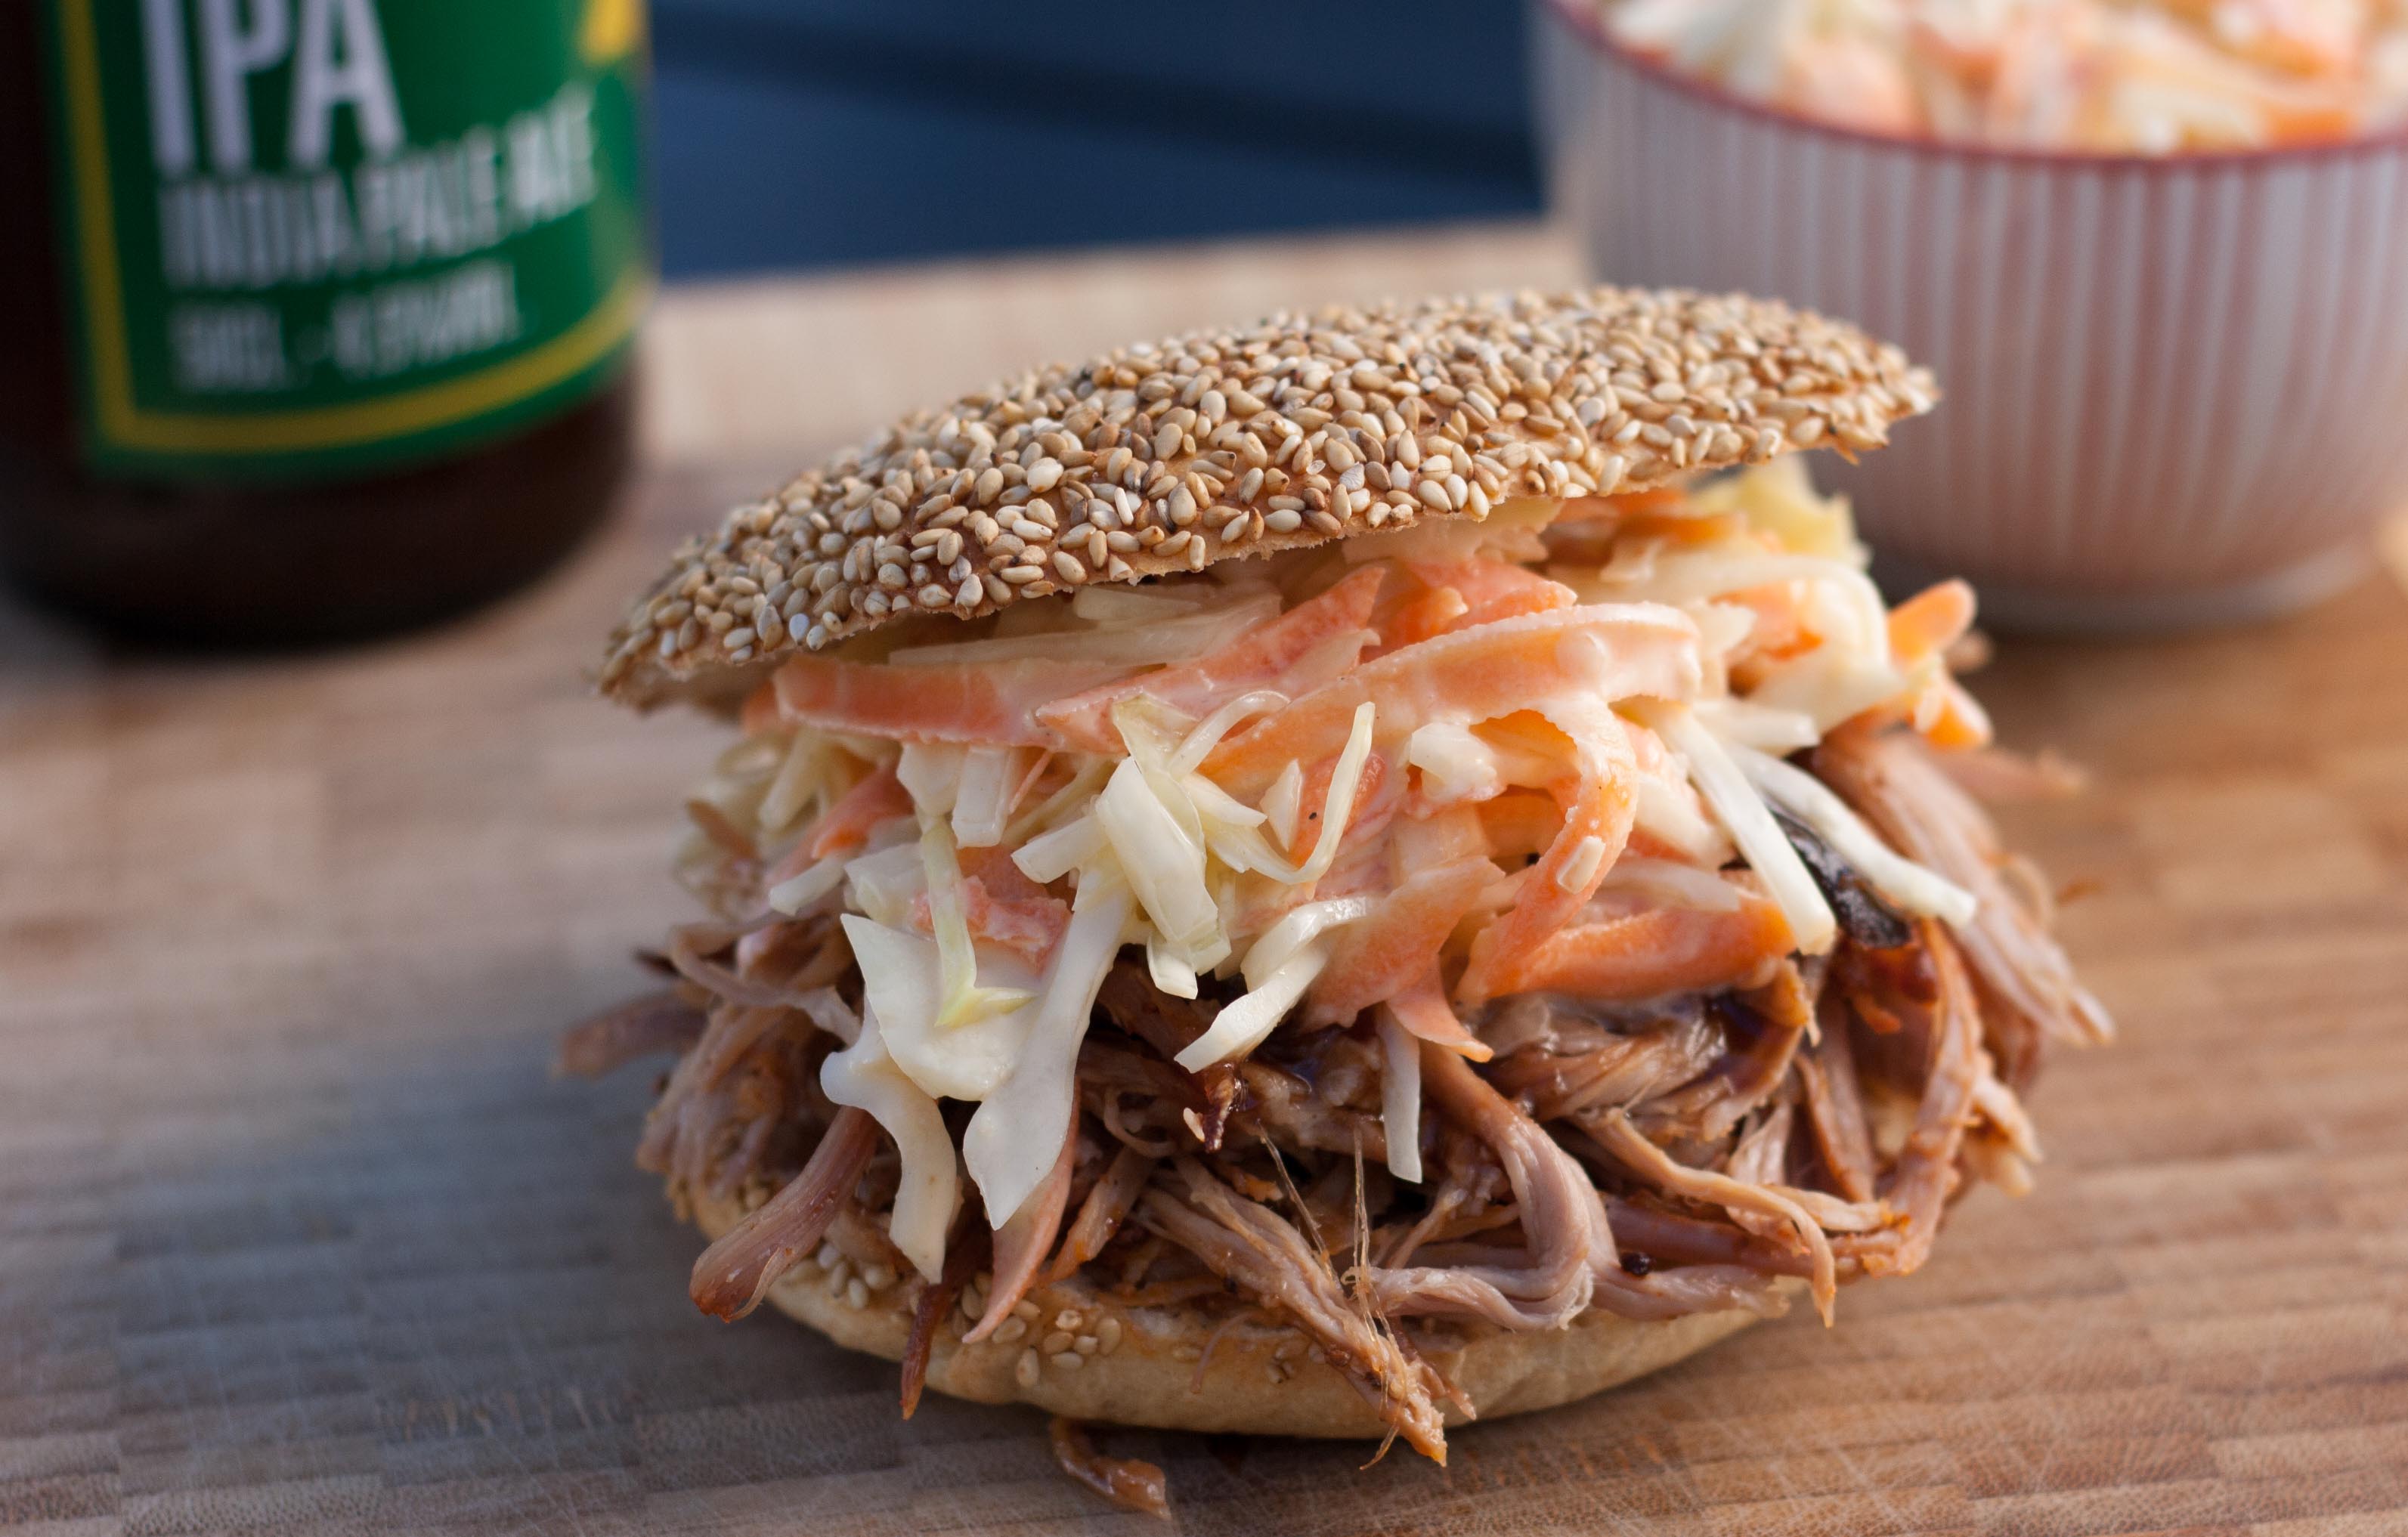 Homemade Pulled Pork with Burger Buns and Coleslaw